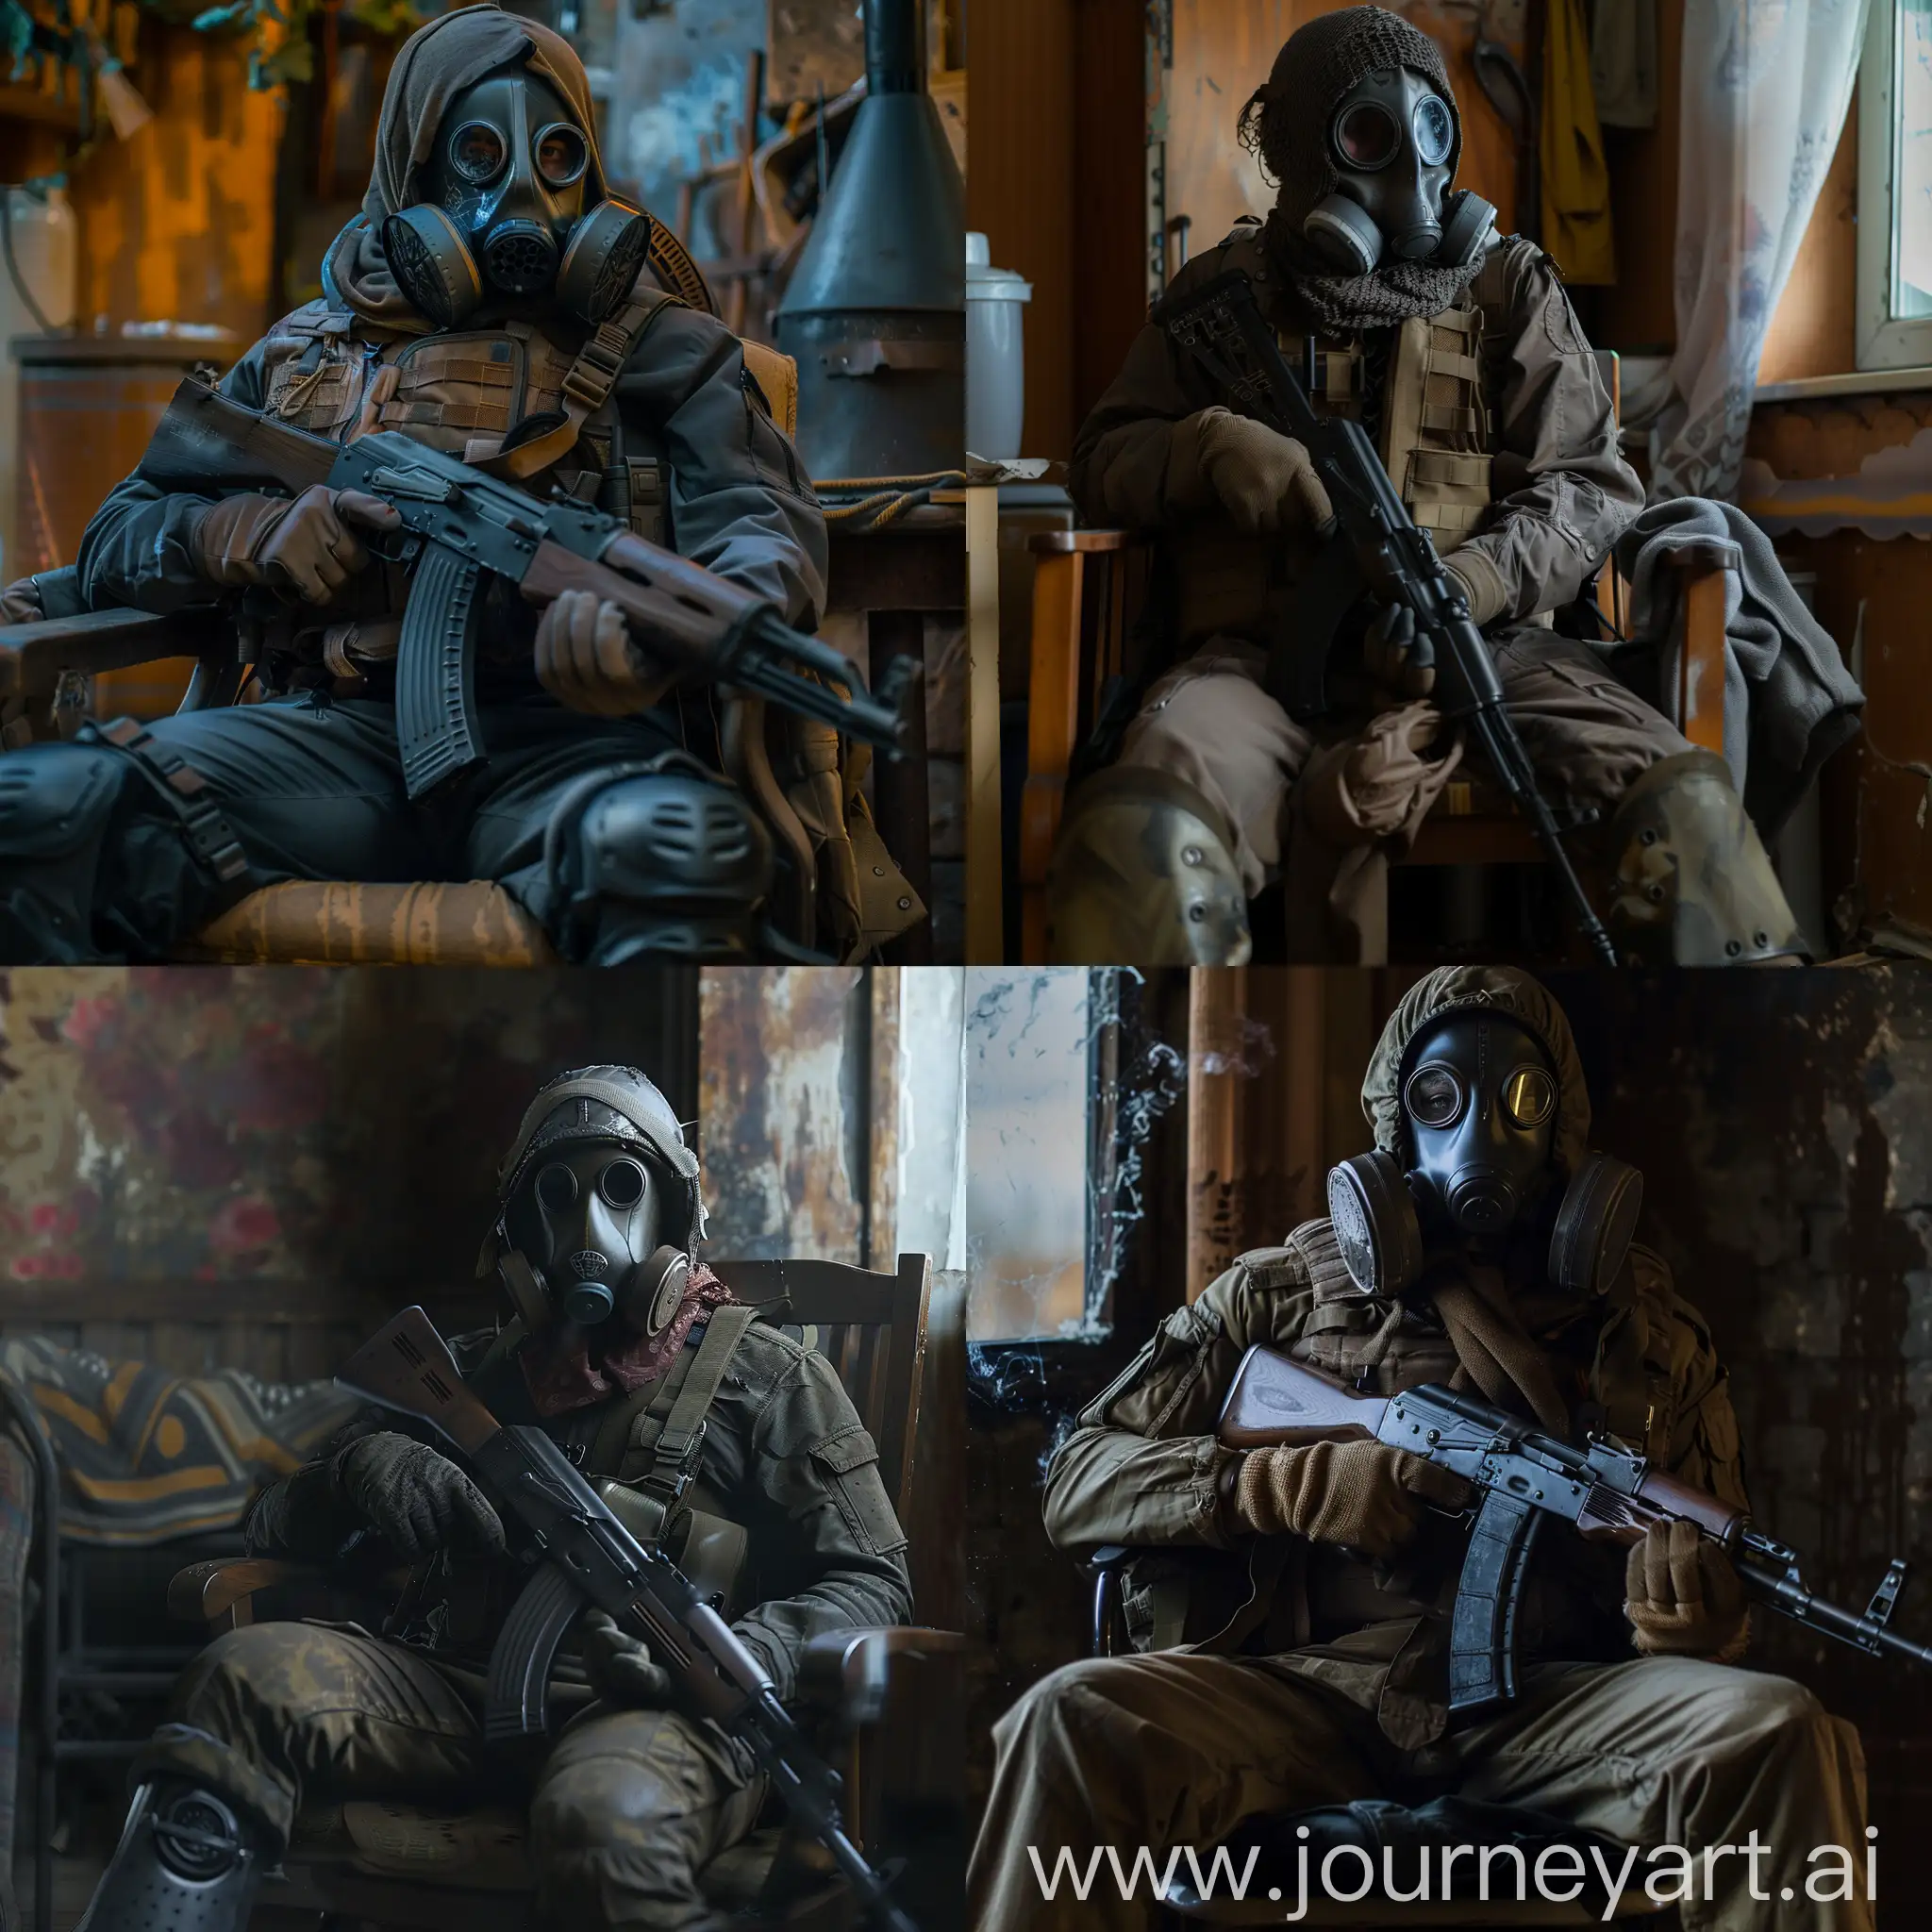 Stalker is sitting on a chair in a gas mask and gloves, holding a Kalashnikov assault rifle